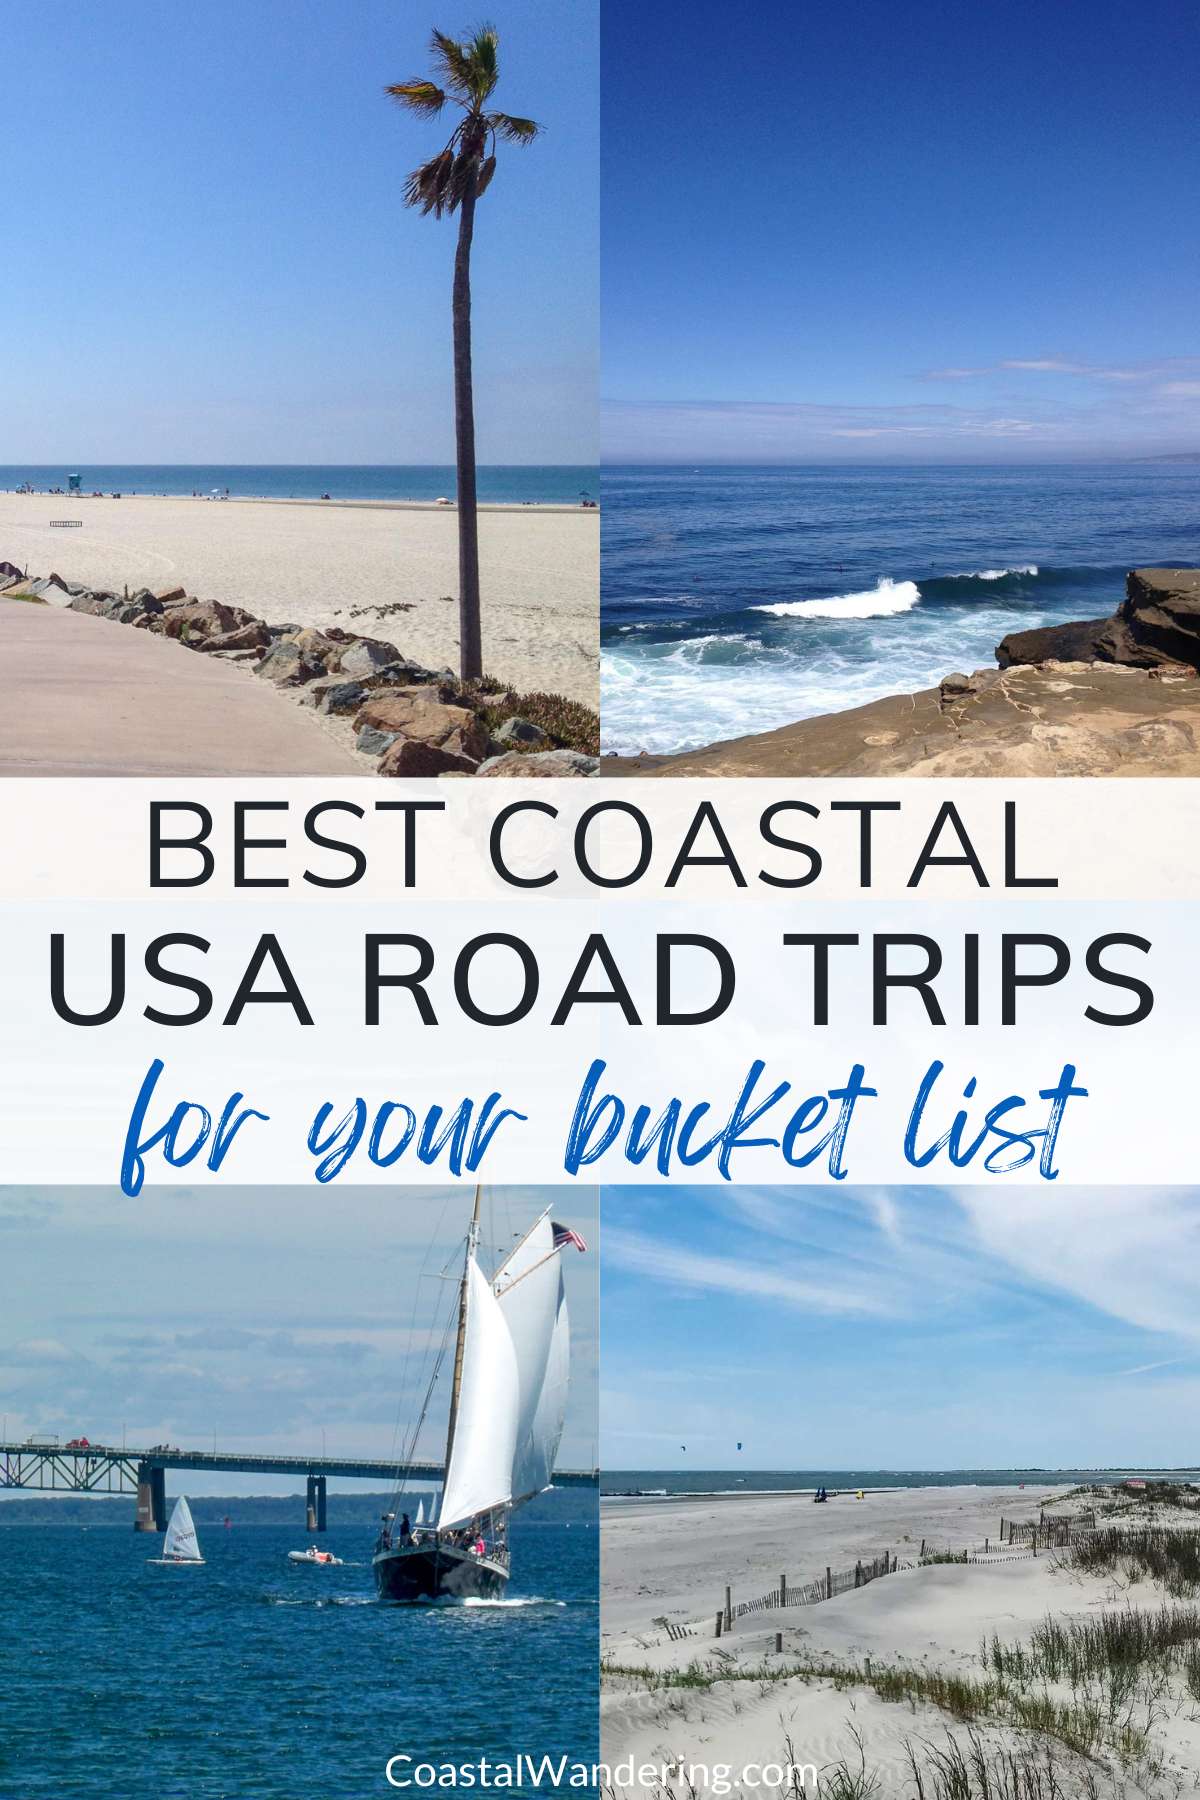 Best coastal USA road trips for your bucket list.